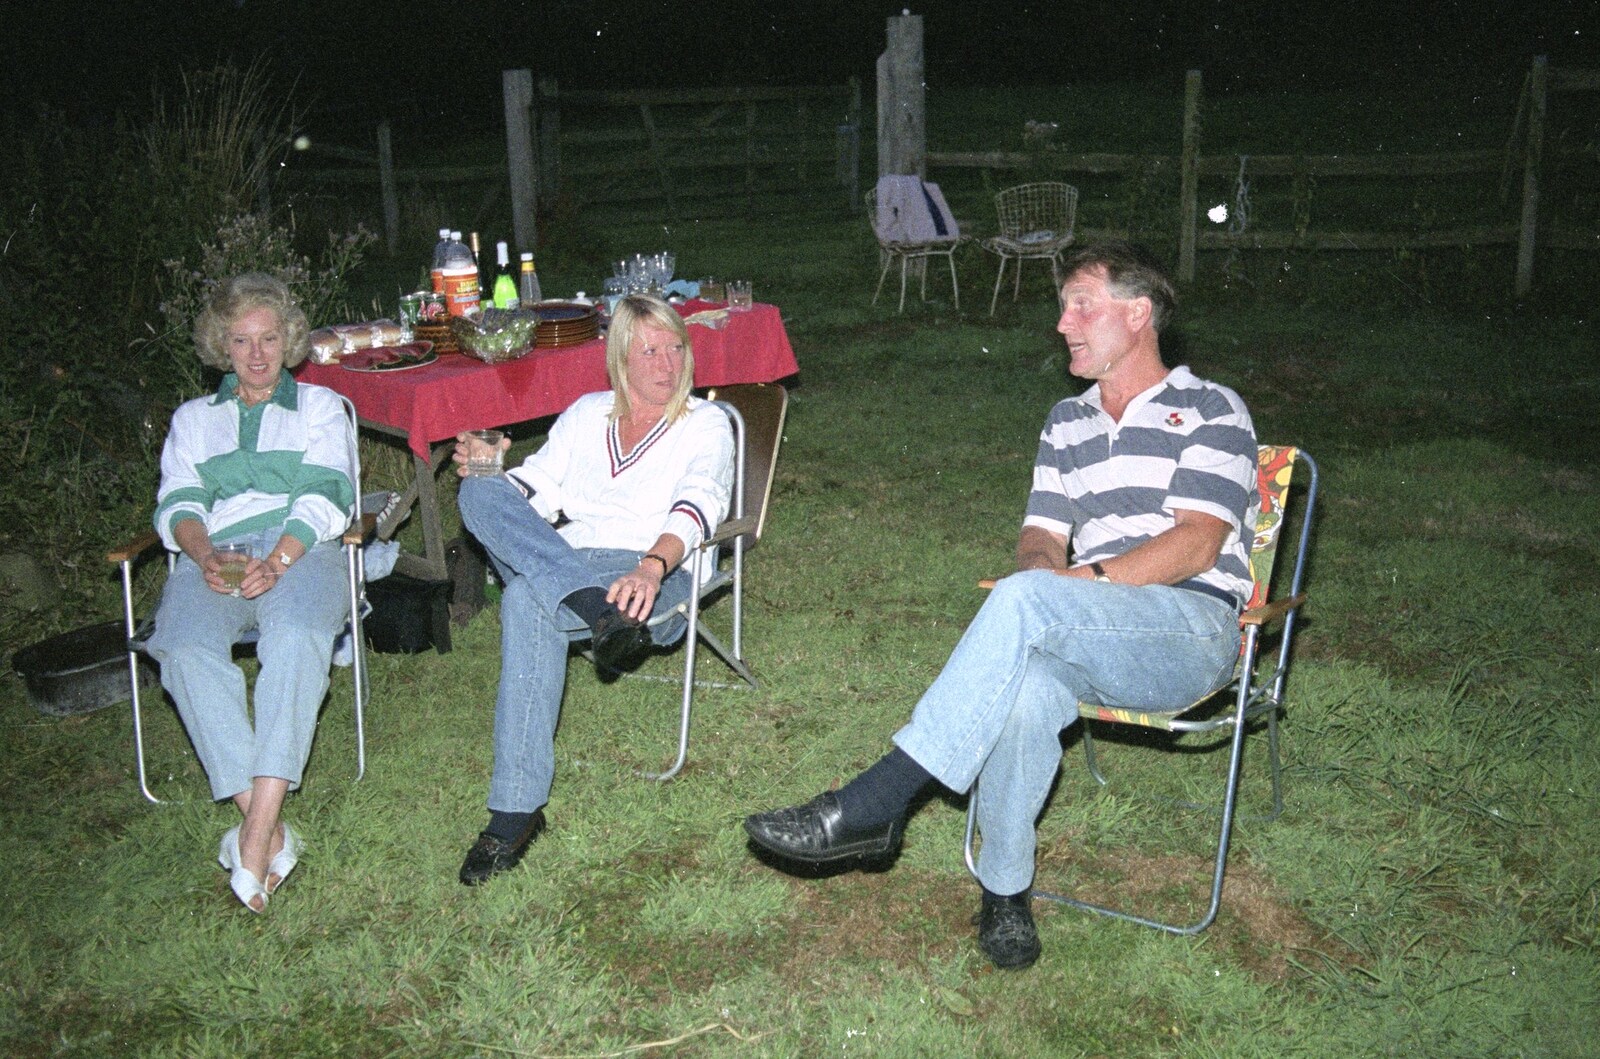 Sue's Fire Dance, Stuston, Suffolk - 21st July 1990: Jean, Sue and Bernie have a chat